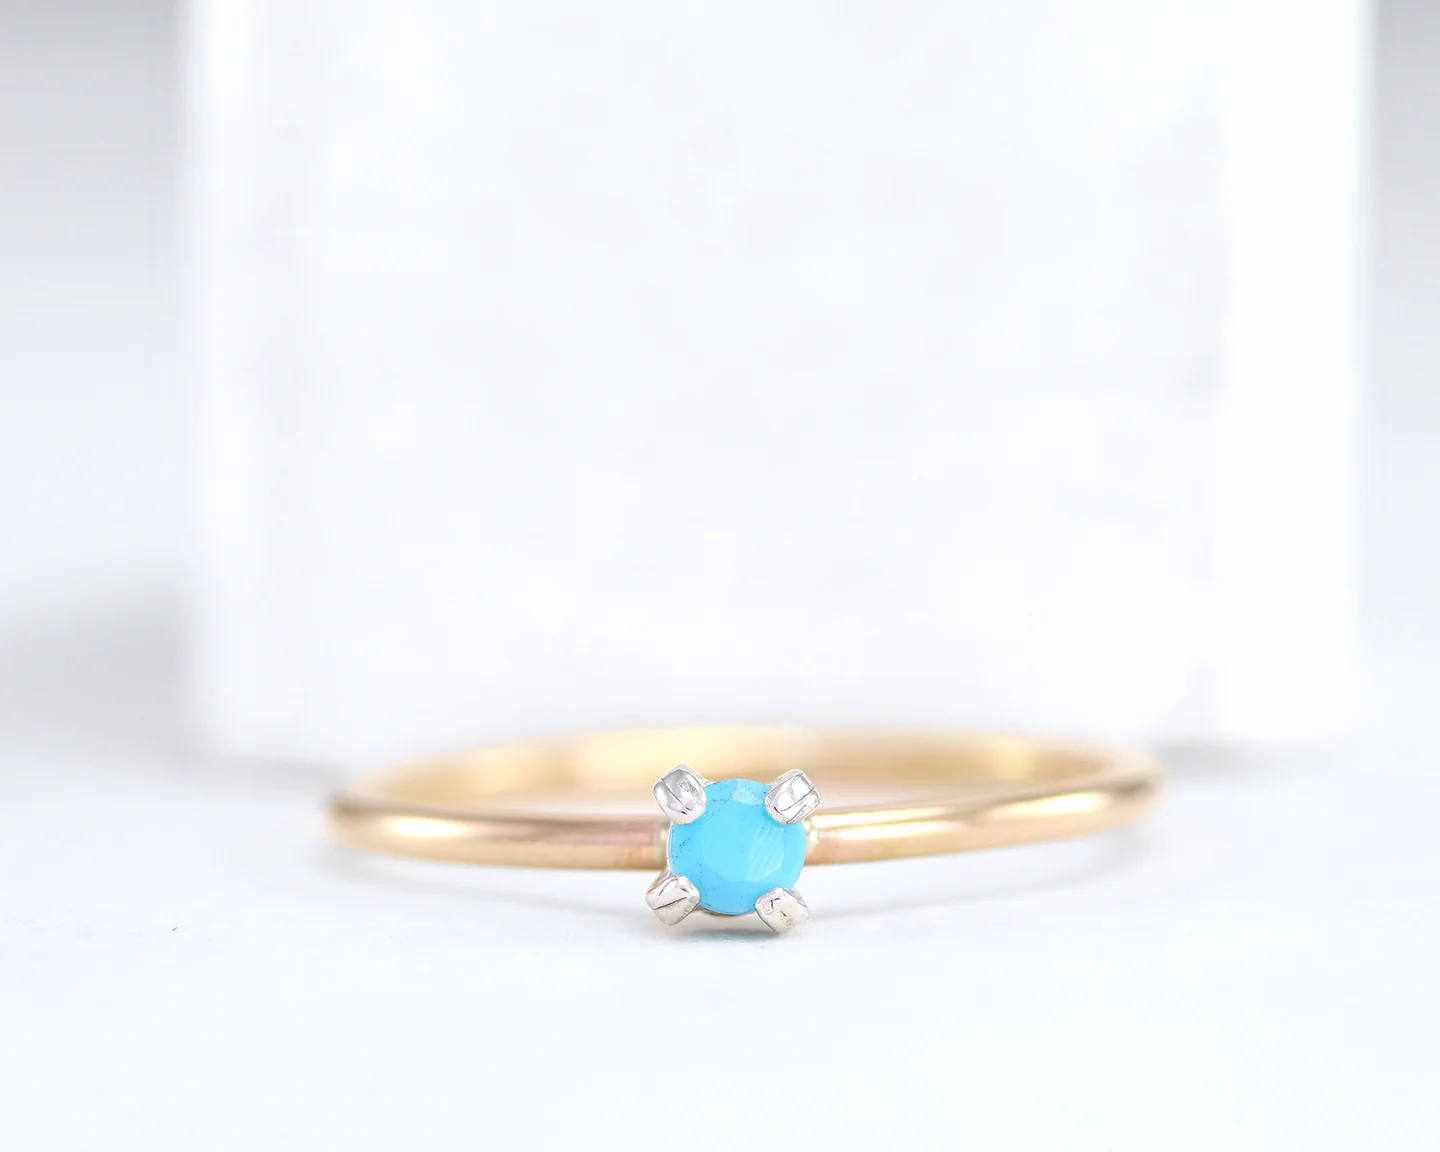 Dainty Ring with a Blue Stone.